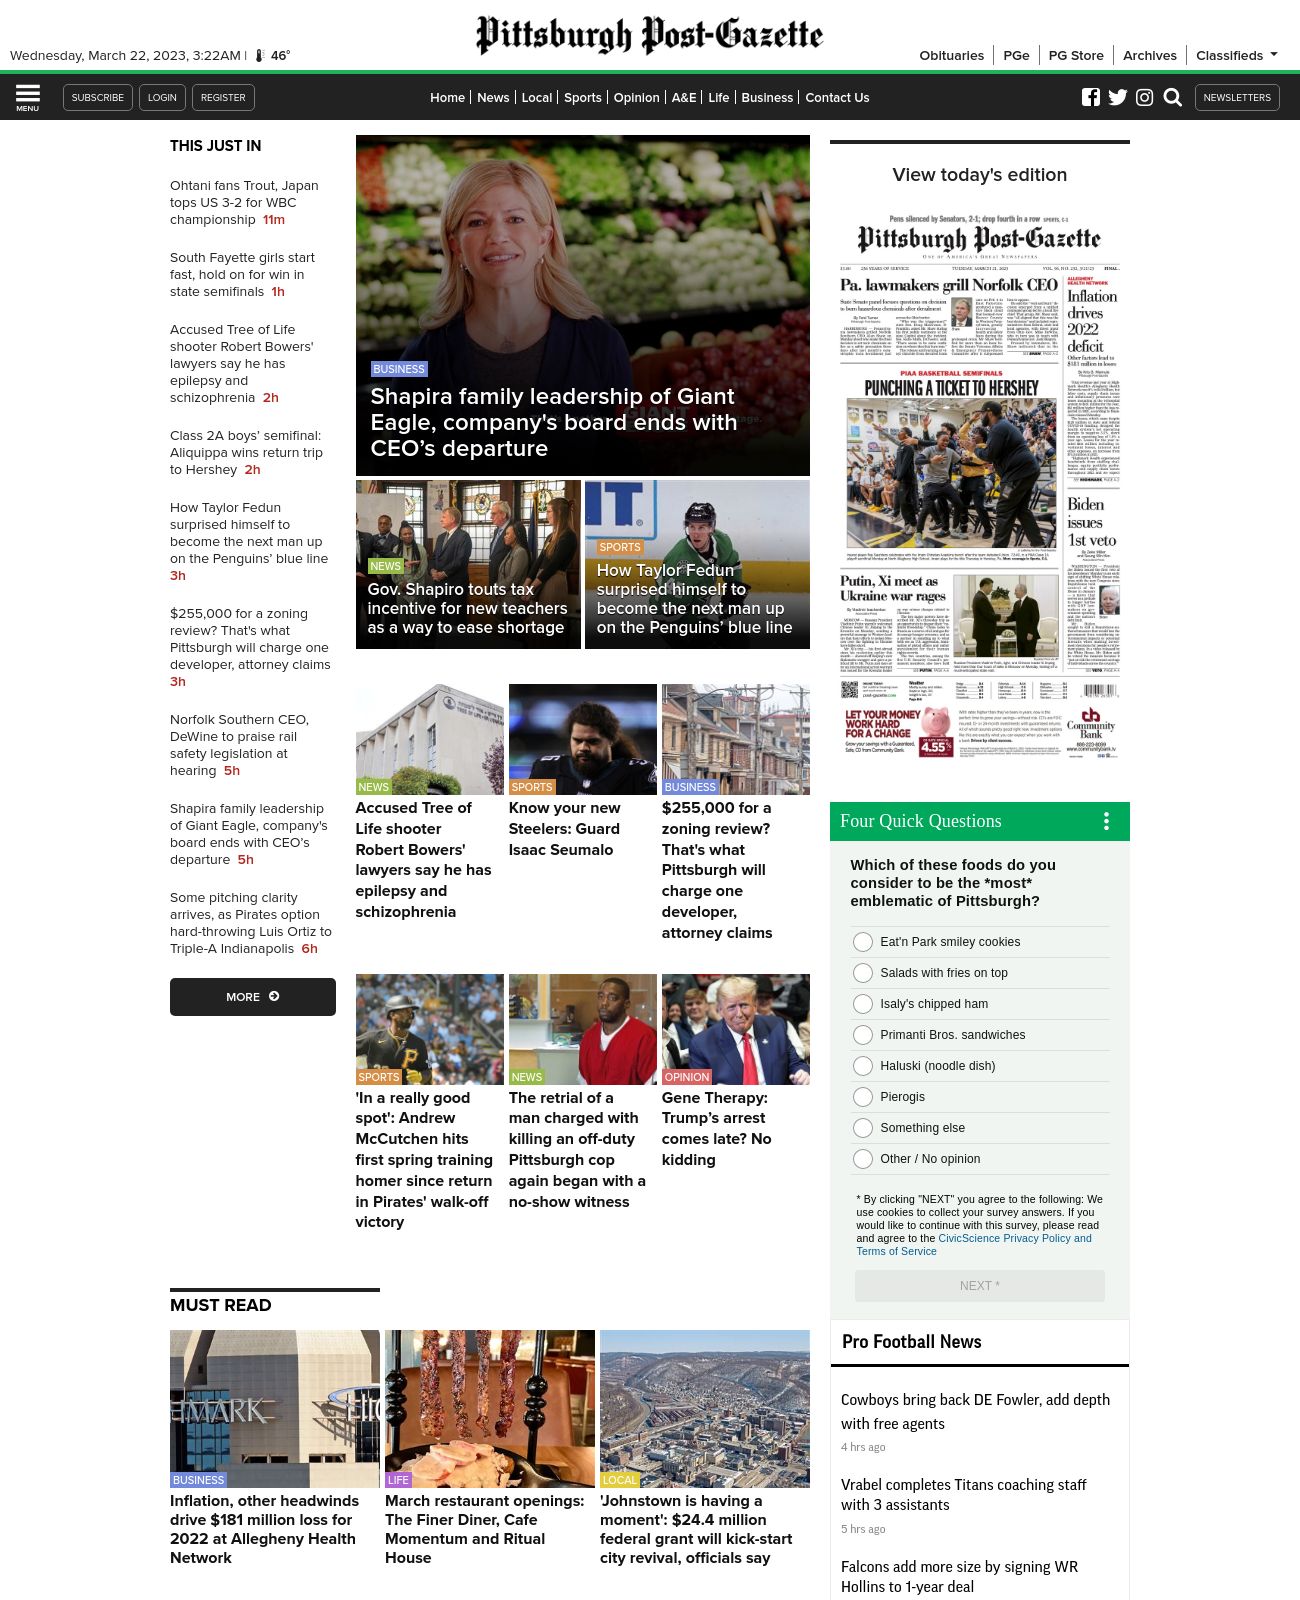 Pittsburgh Post-Gazette at 2023-03-21 23:41:24-04:00 local time